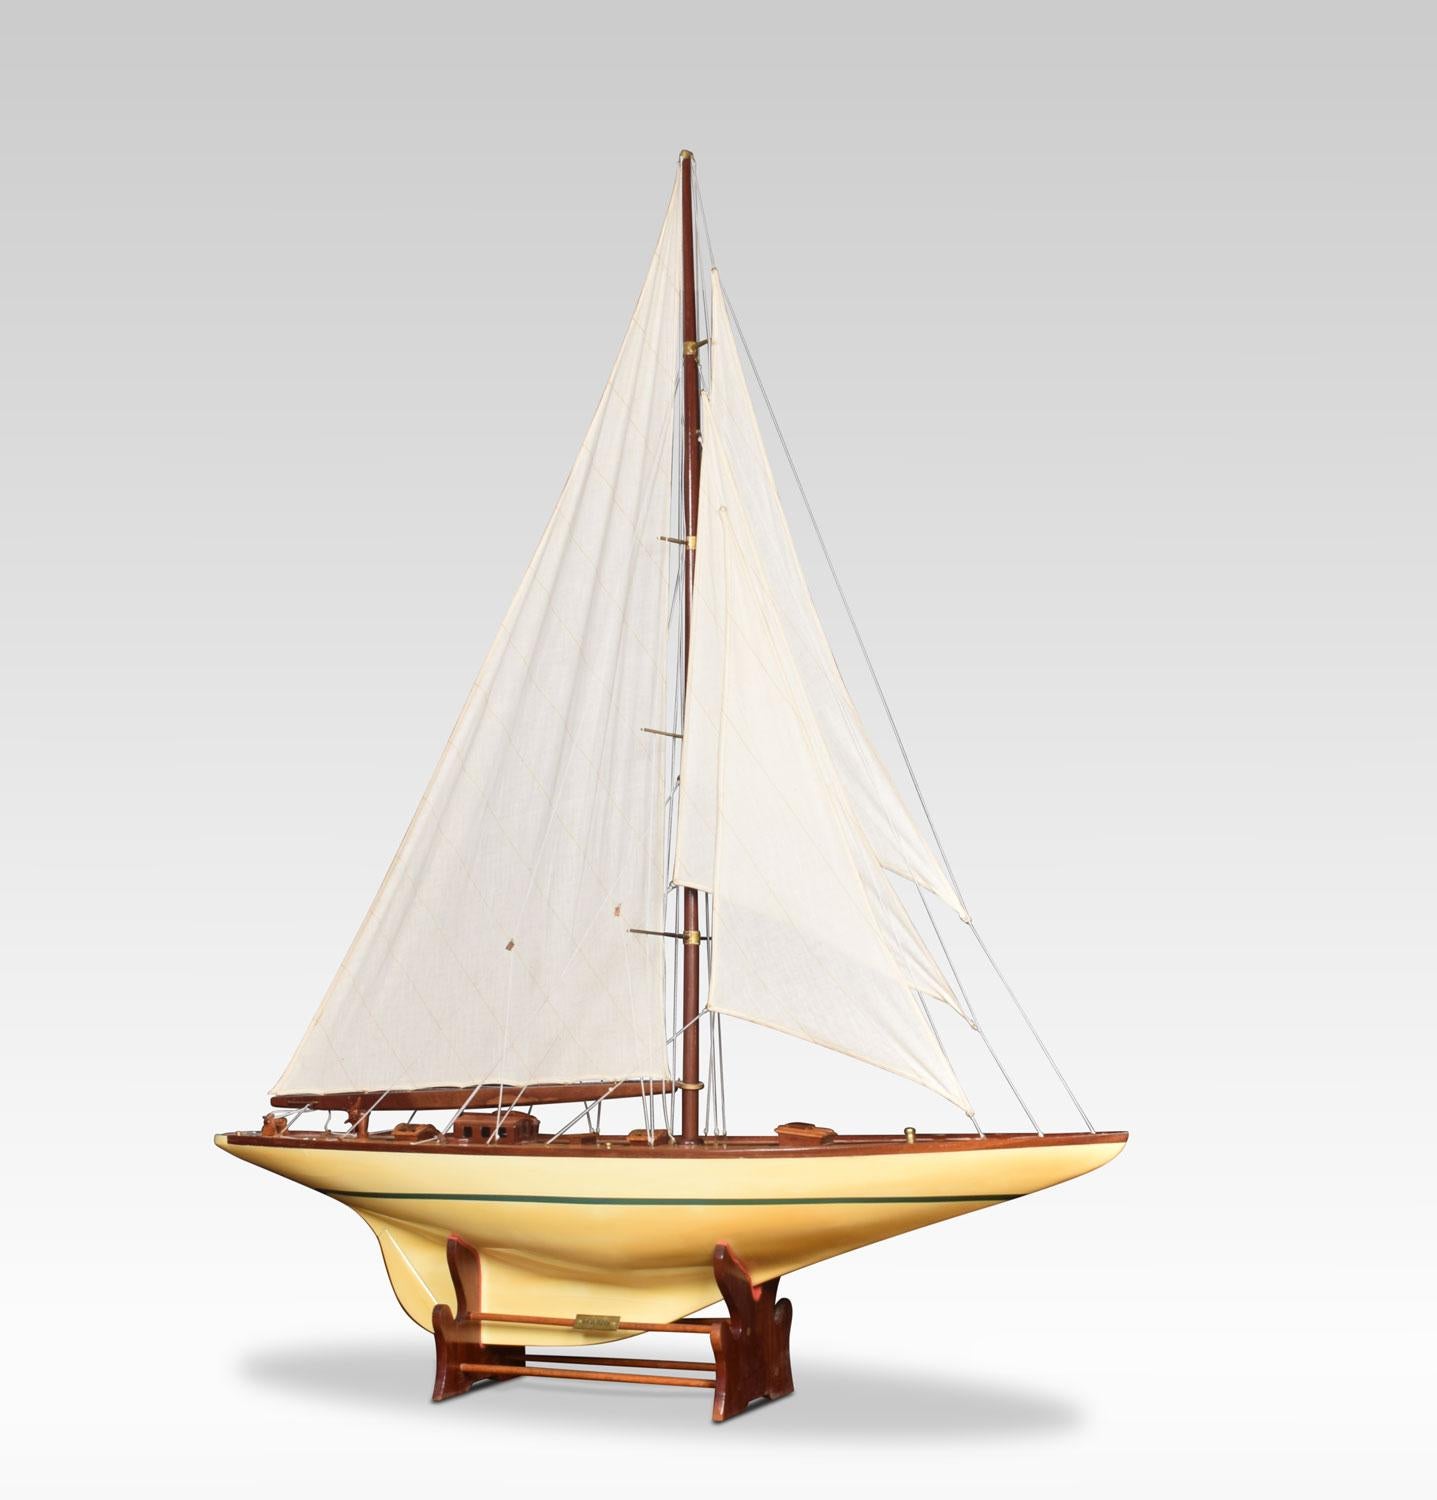 Large pond yacht, painted in yellow and green complete with four sails and simulated planked decking. The yacht named Shamrock.
Dimensions
Height 61 Inches
Width 47 Inches
Depth 10 Inches